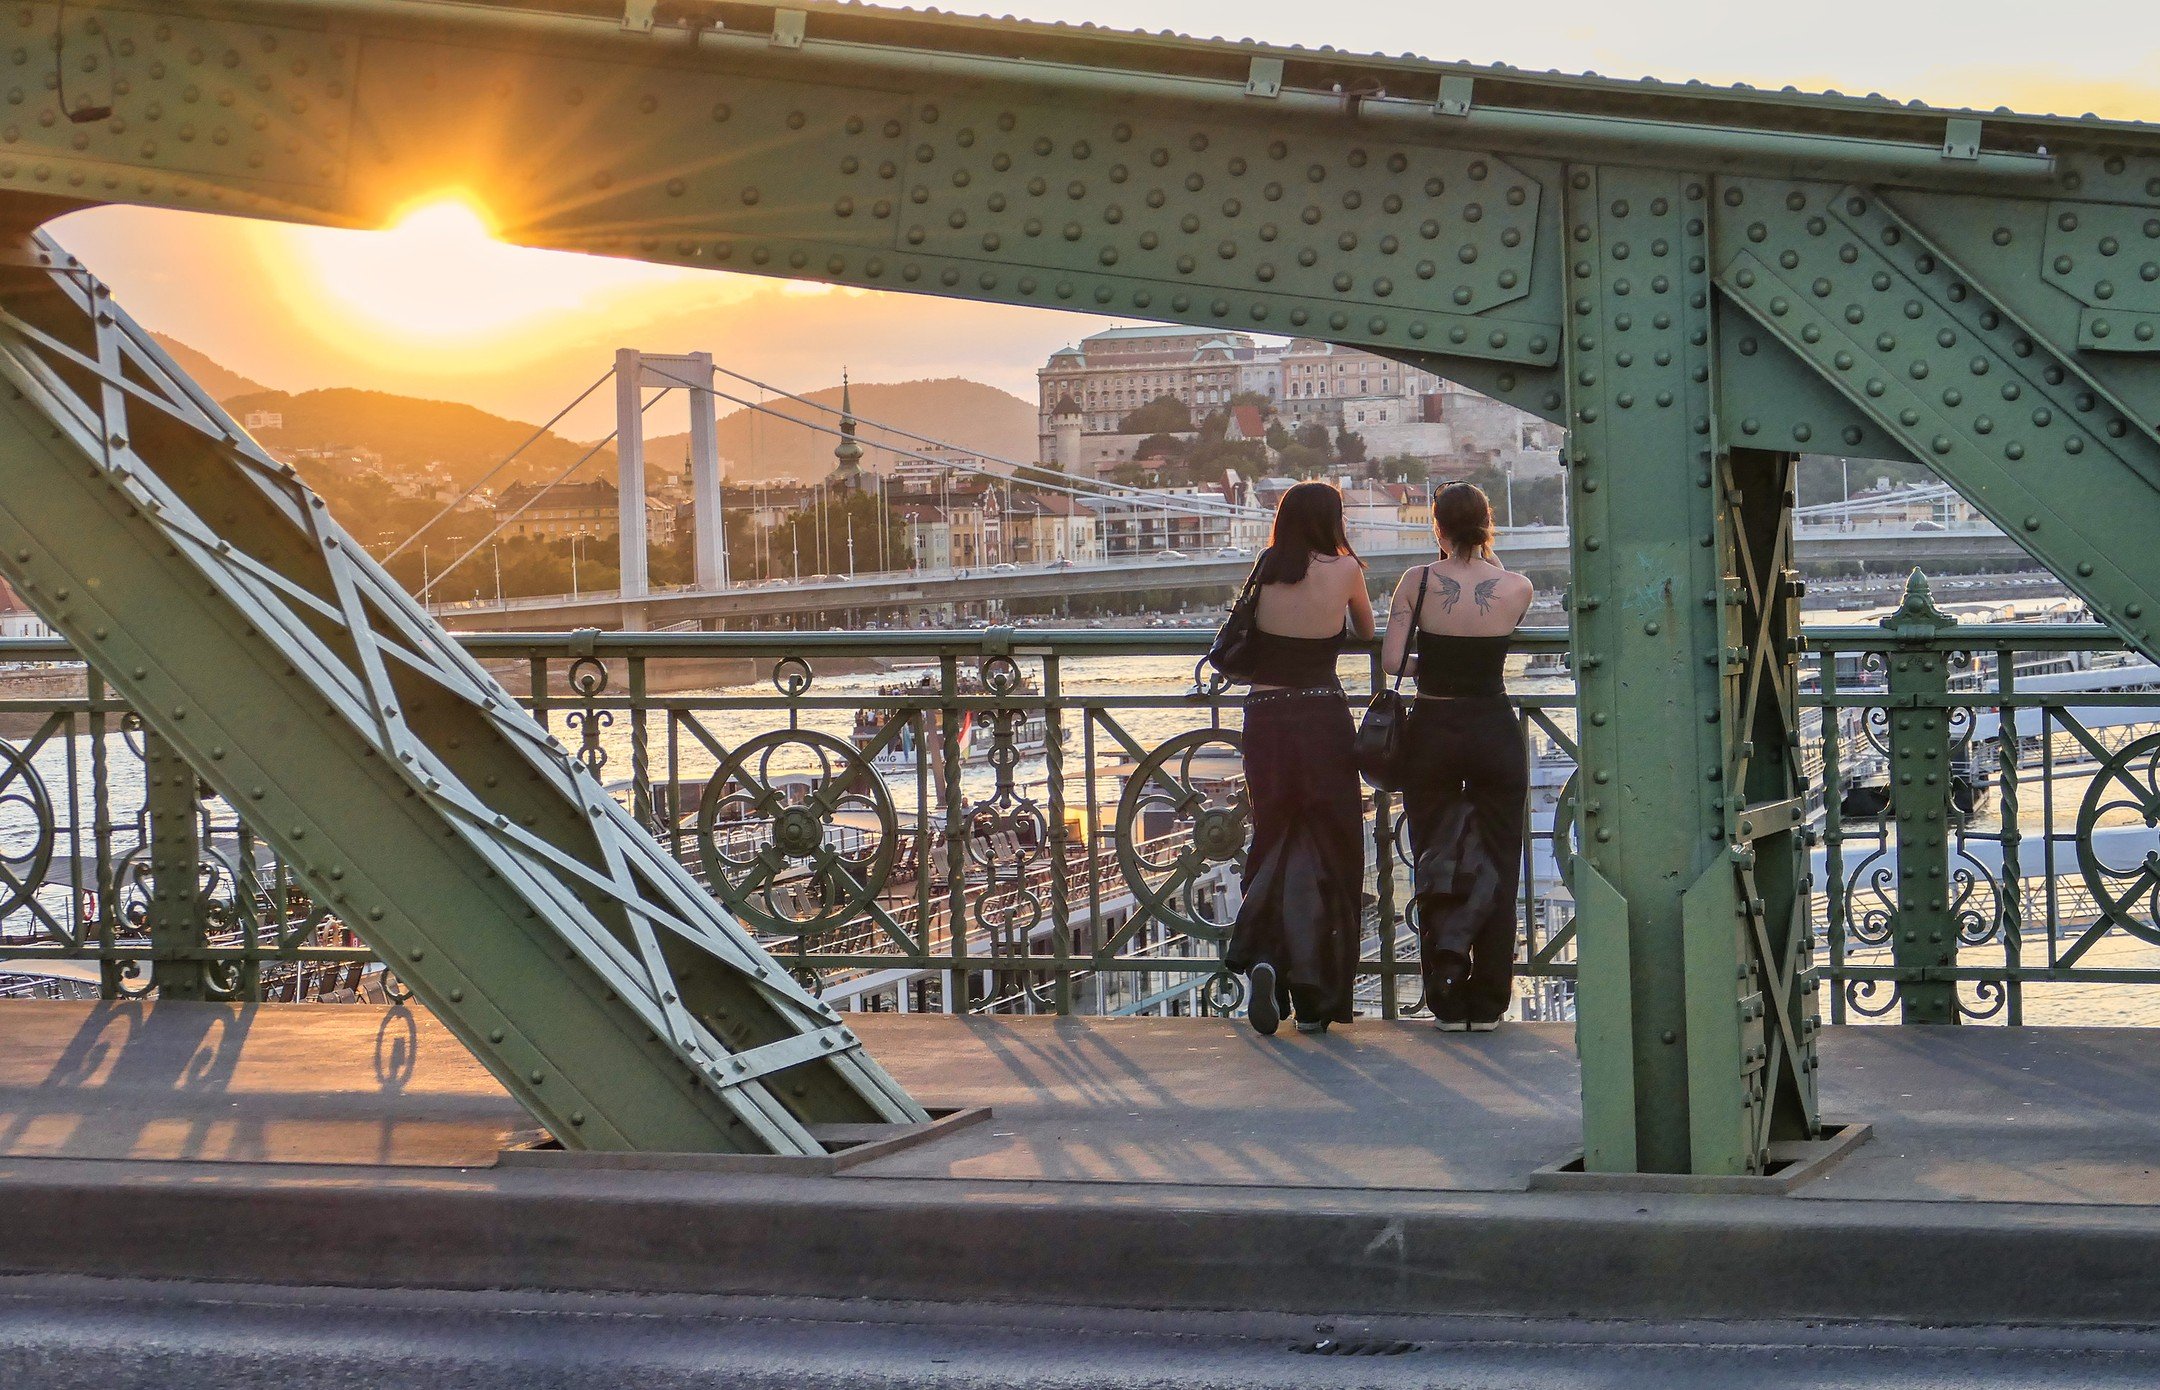 &quot;Golden hour magic in Budapest 🌅 Capturing the serene beauty of the city from the Liberty Bridge. The perfect moment to pause and enjoy the view.&quot;

#Budapest #Hungary #LibertyBridge #GoldenHour #Sunset #TravelPhotography #Cityscape #UrbanE